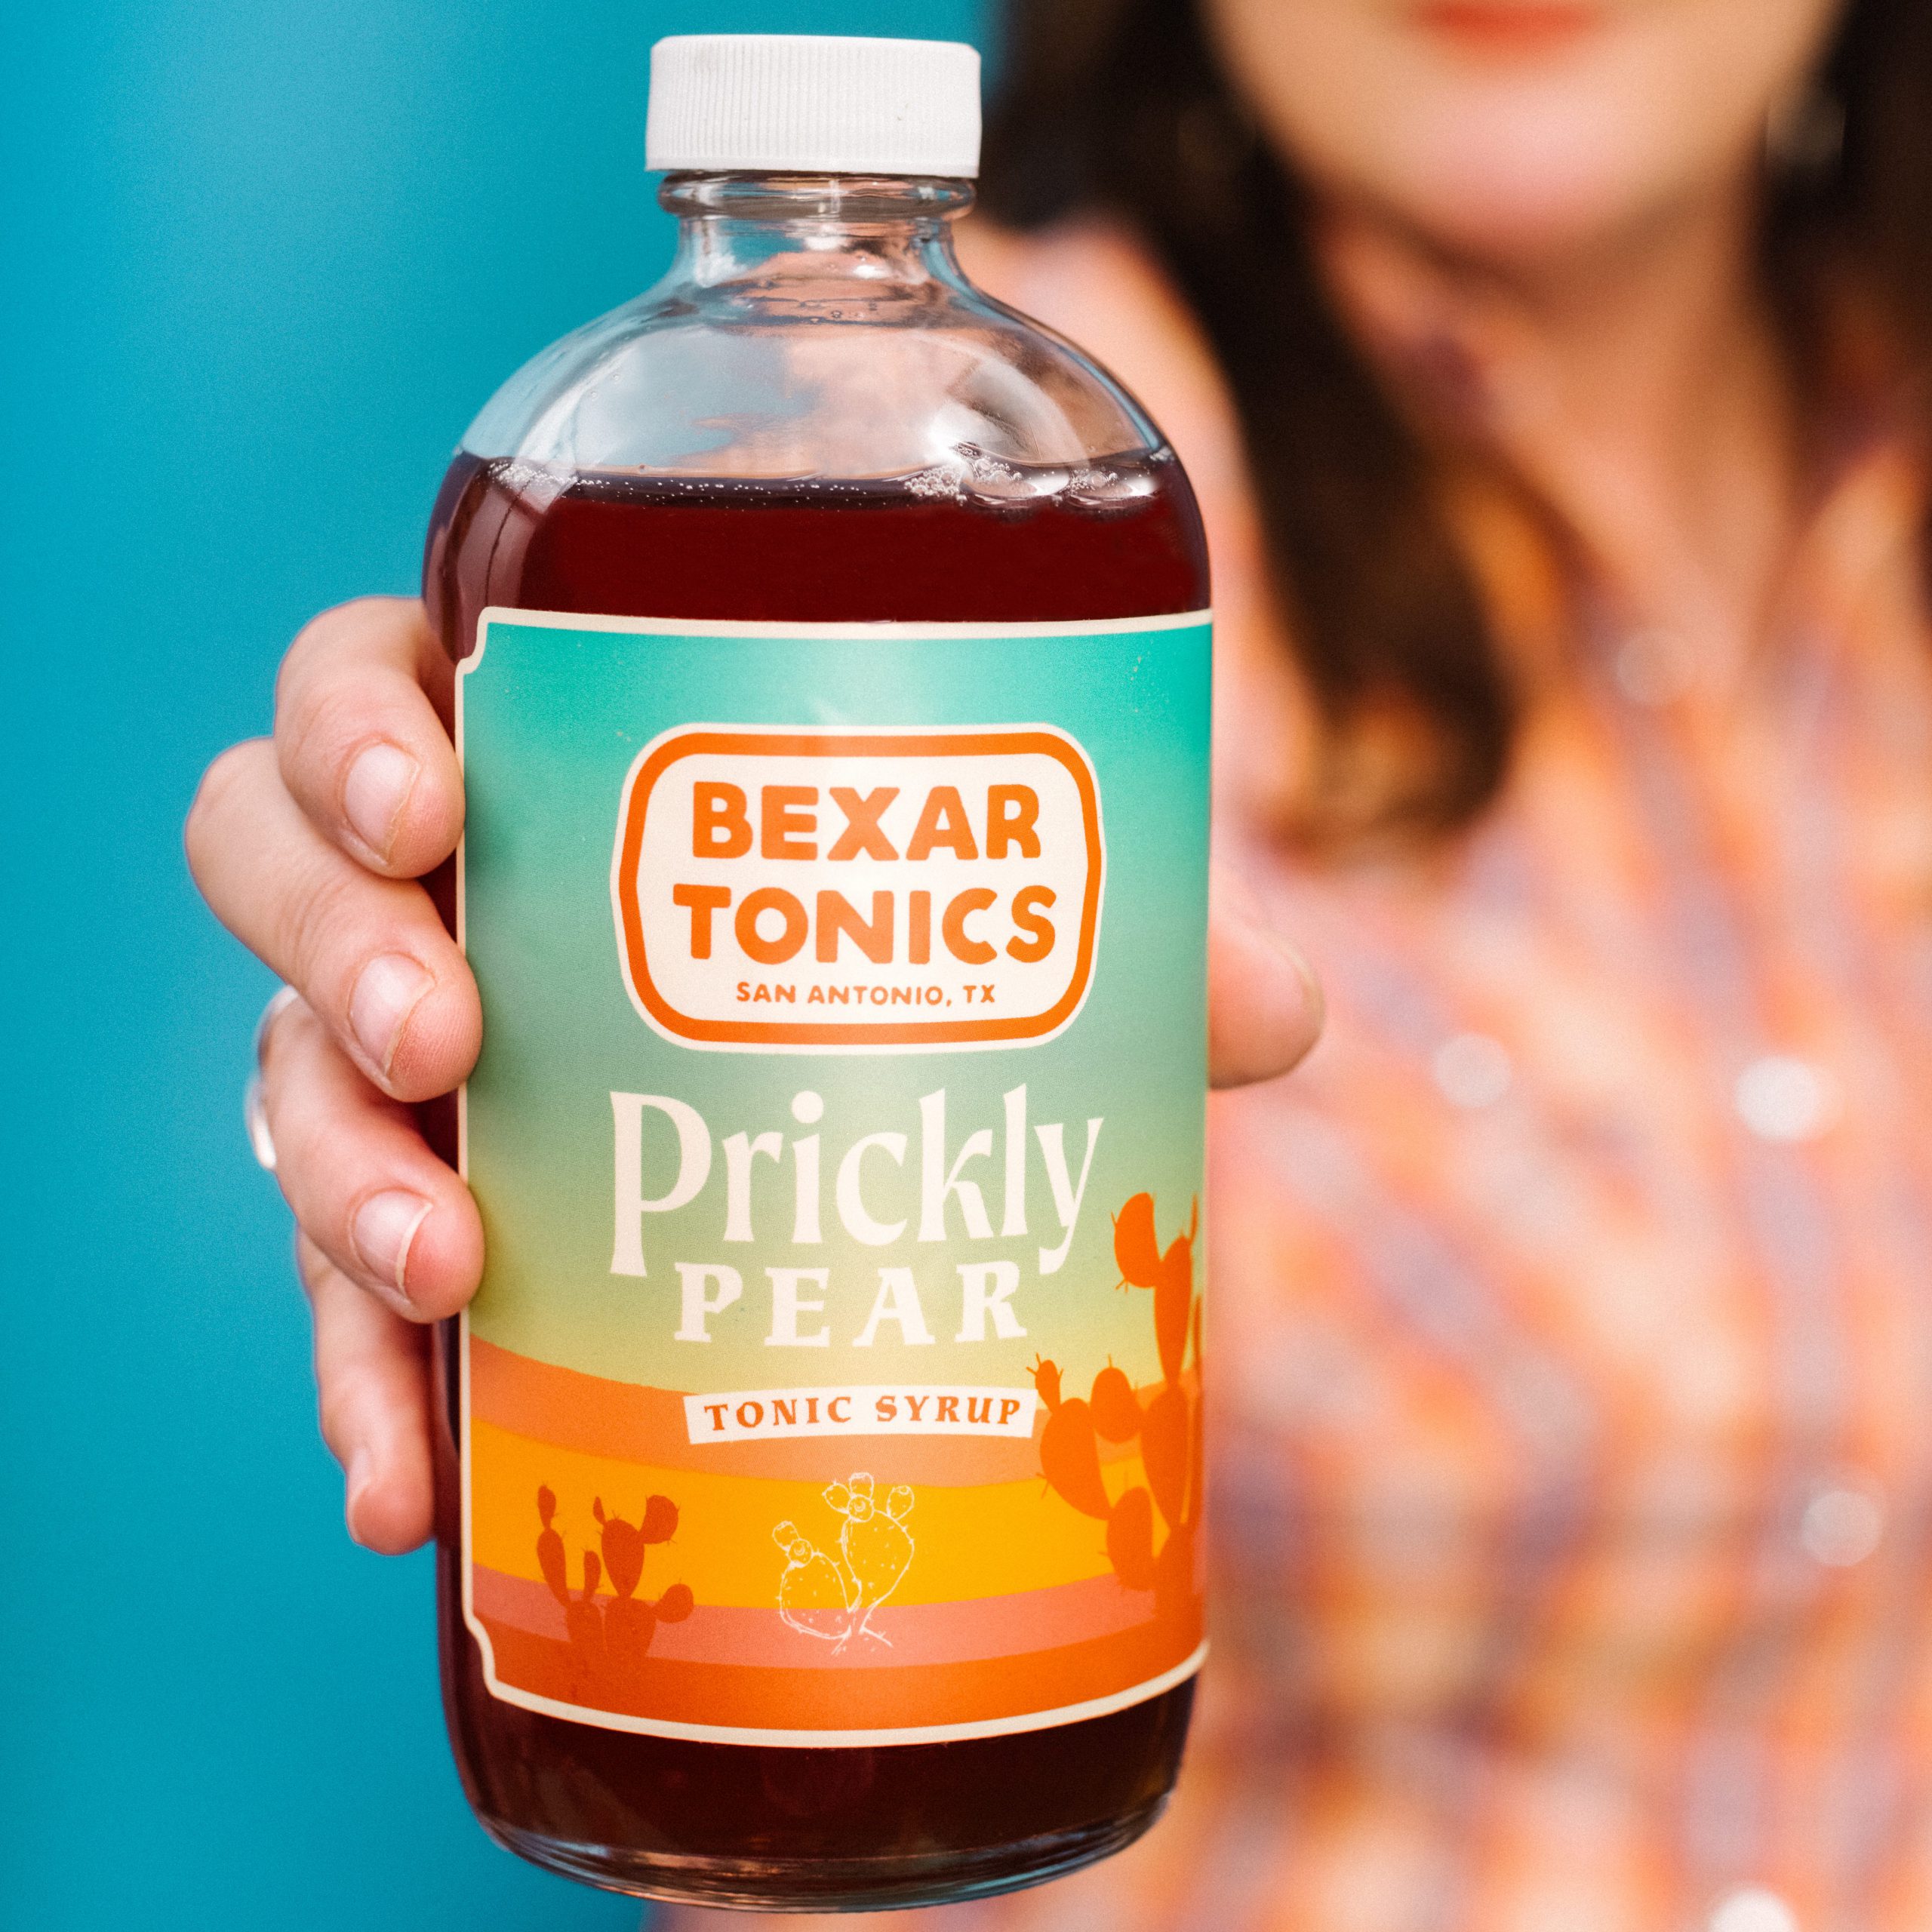 hand holding bottle of prickly pear tonic